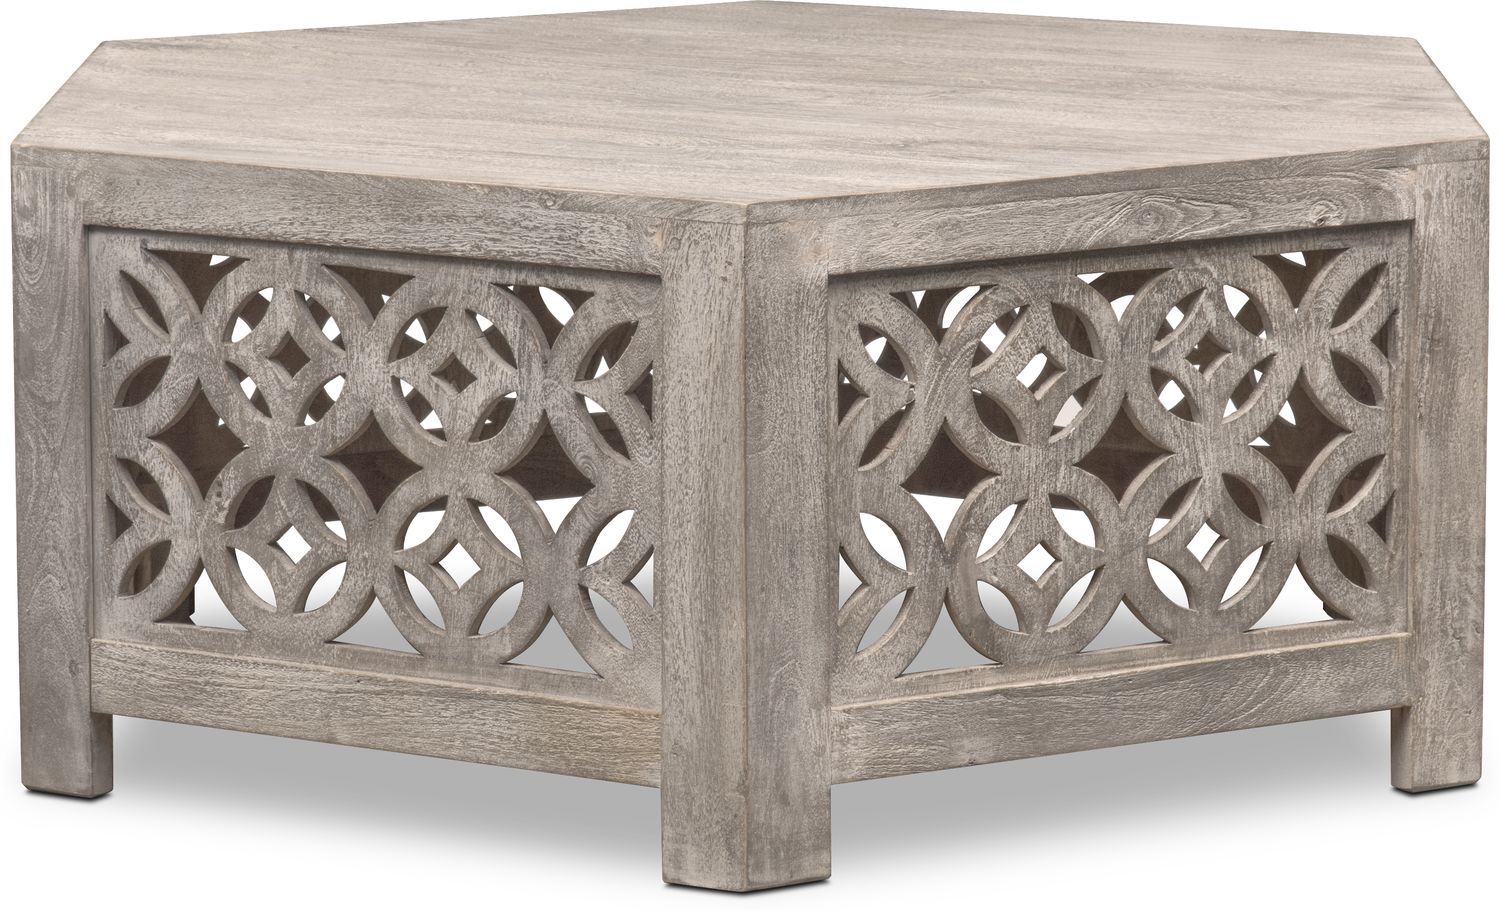 Parlor Coffee Table – Gray | Value City Furniture And Mattresses Throughout Raven Grey Tv Stands (View 11 of 30)